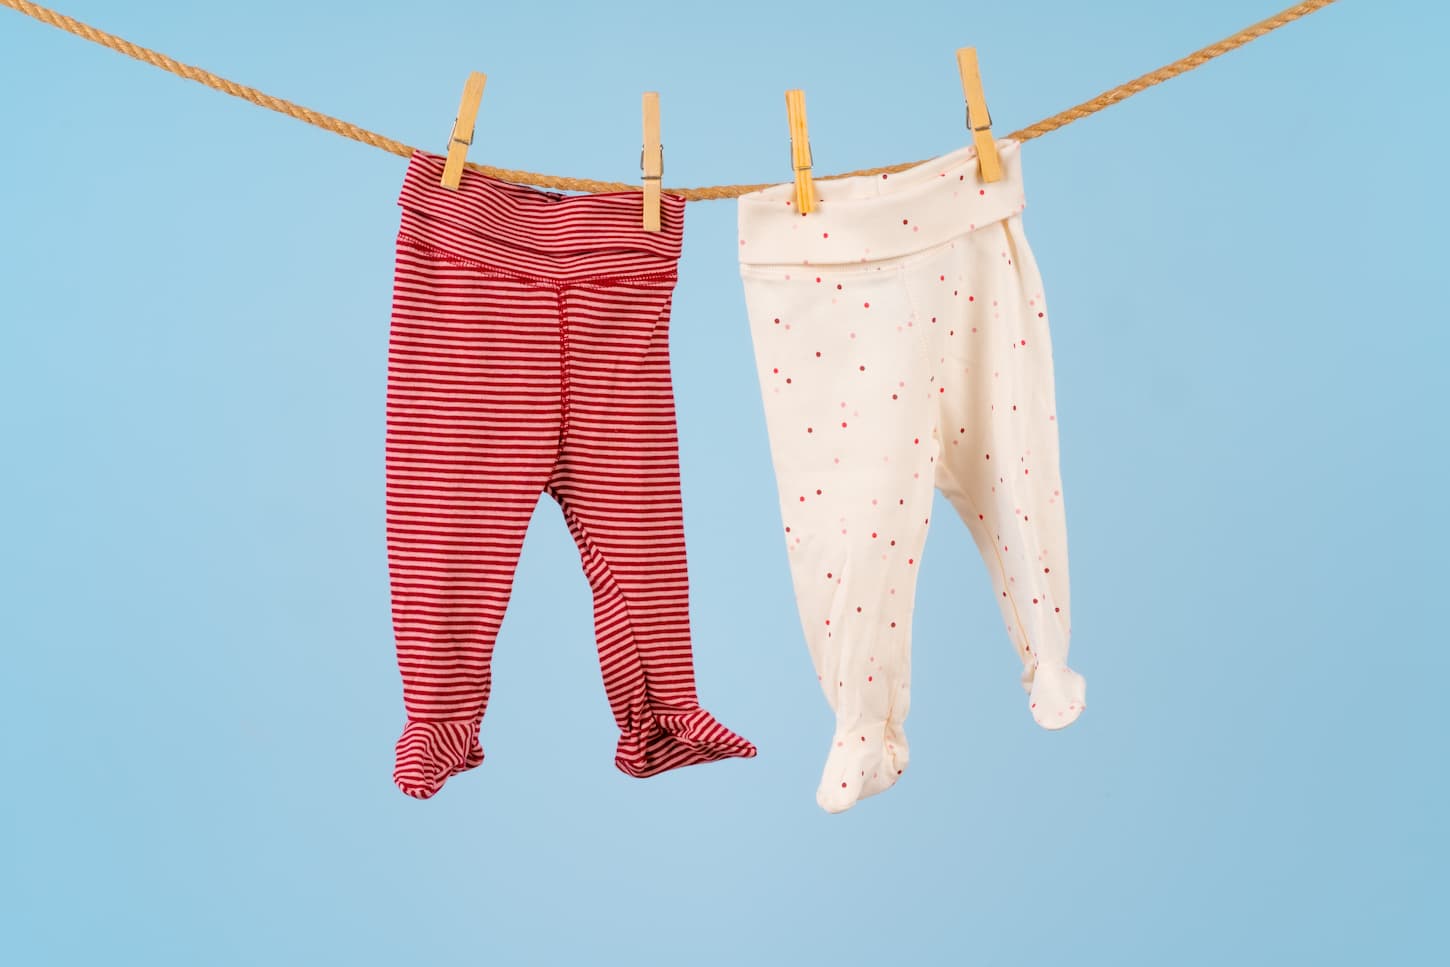 An image of Baby girl clothes pinned on a clothesline against blue background.